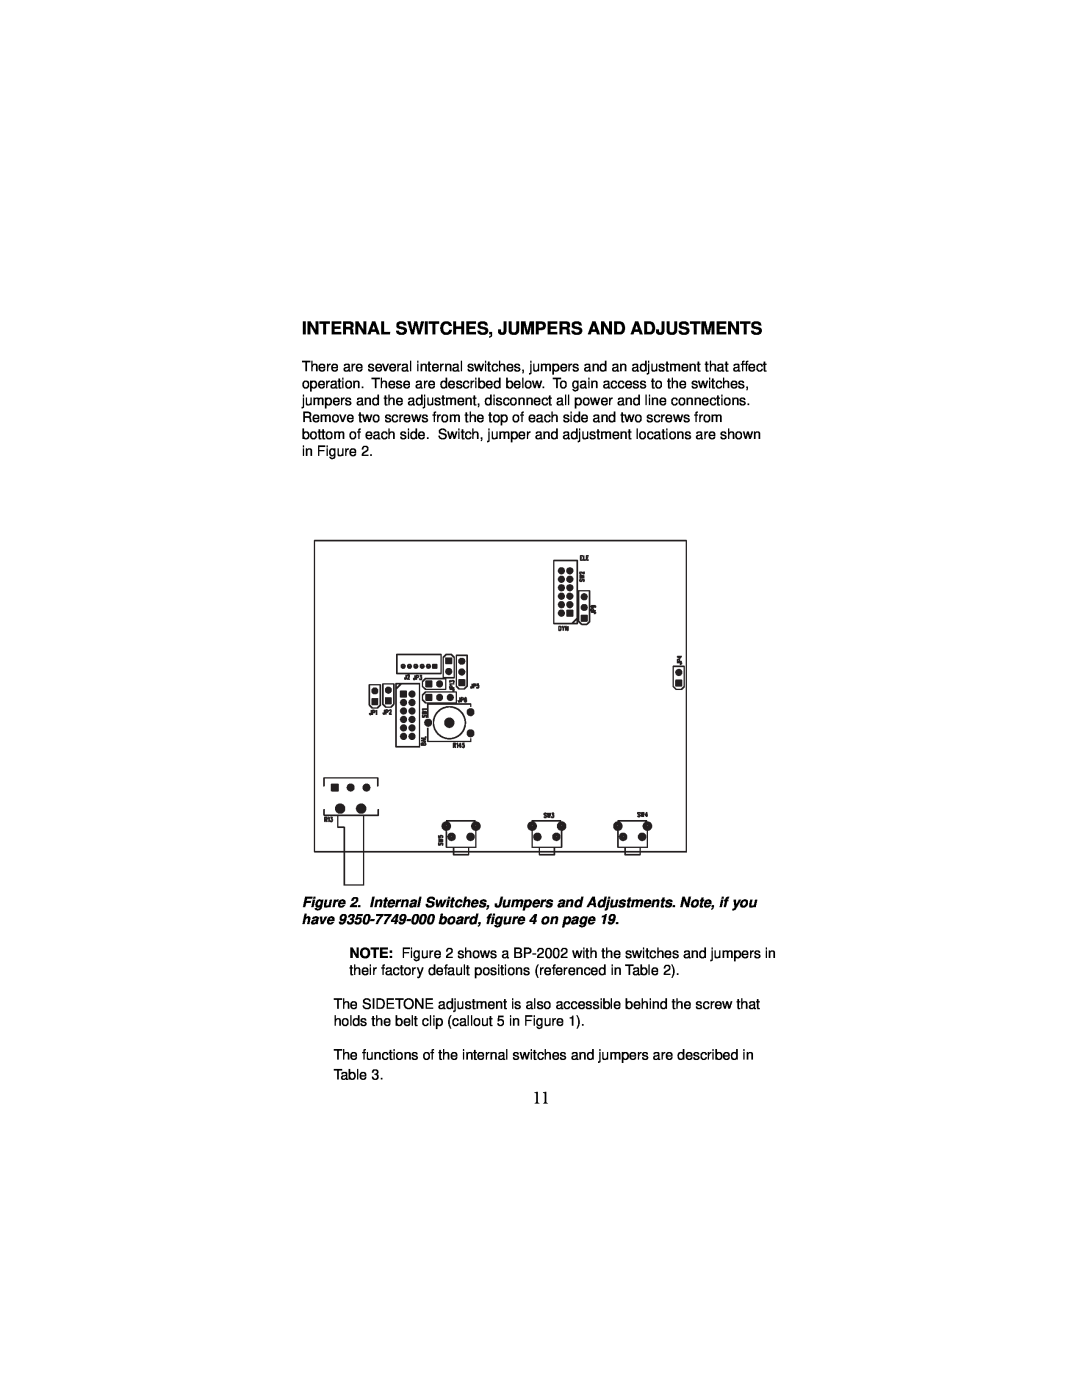 Telex BP-1002, BP-2002 operating instructions Internal Switches, Jumpers And Adjustments 